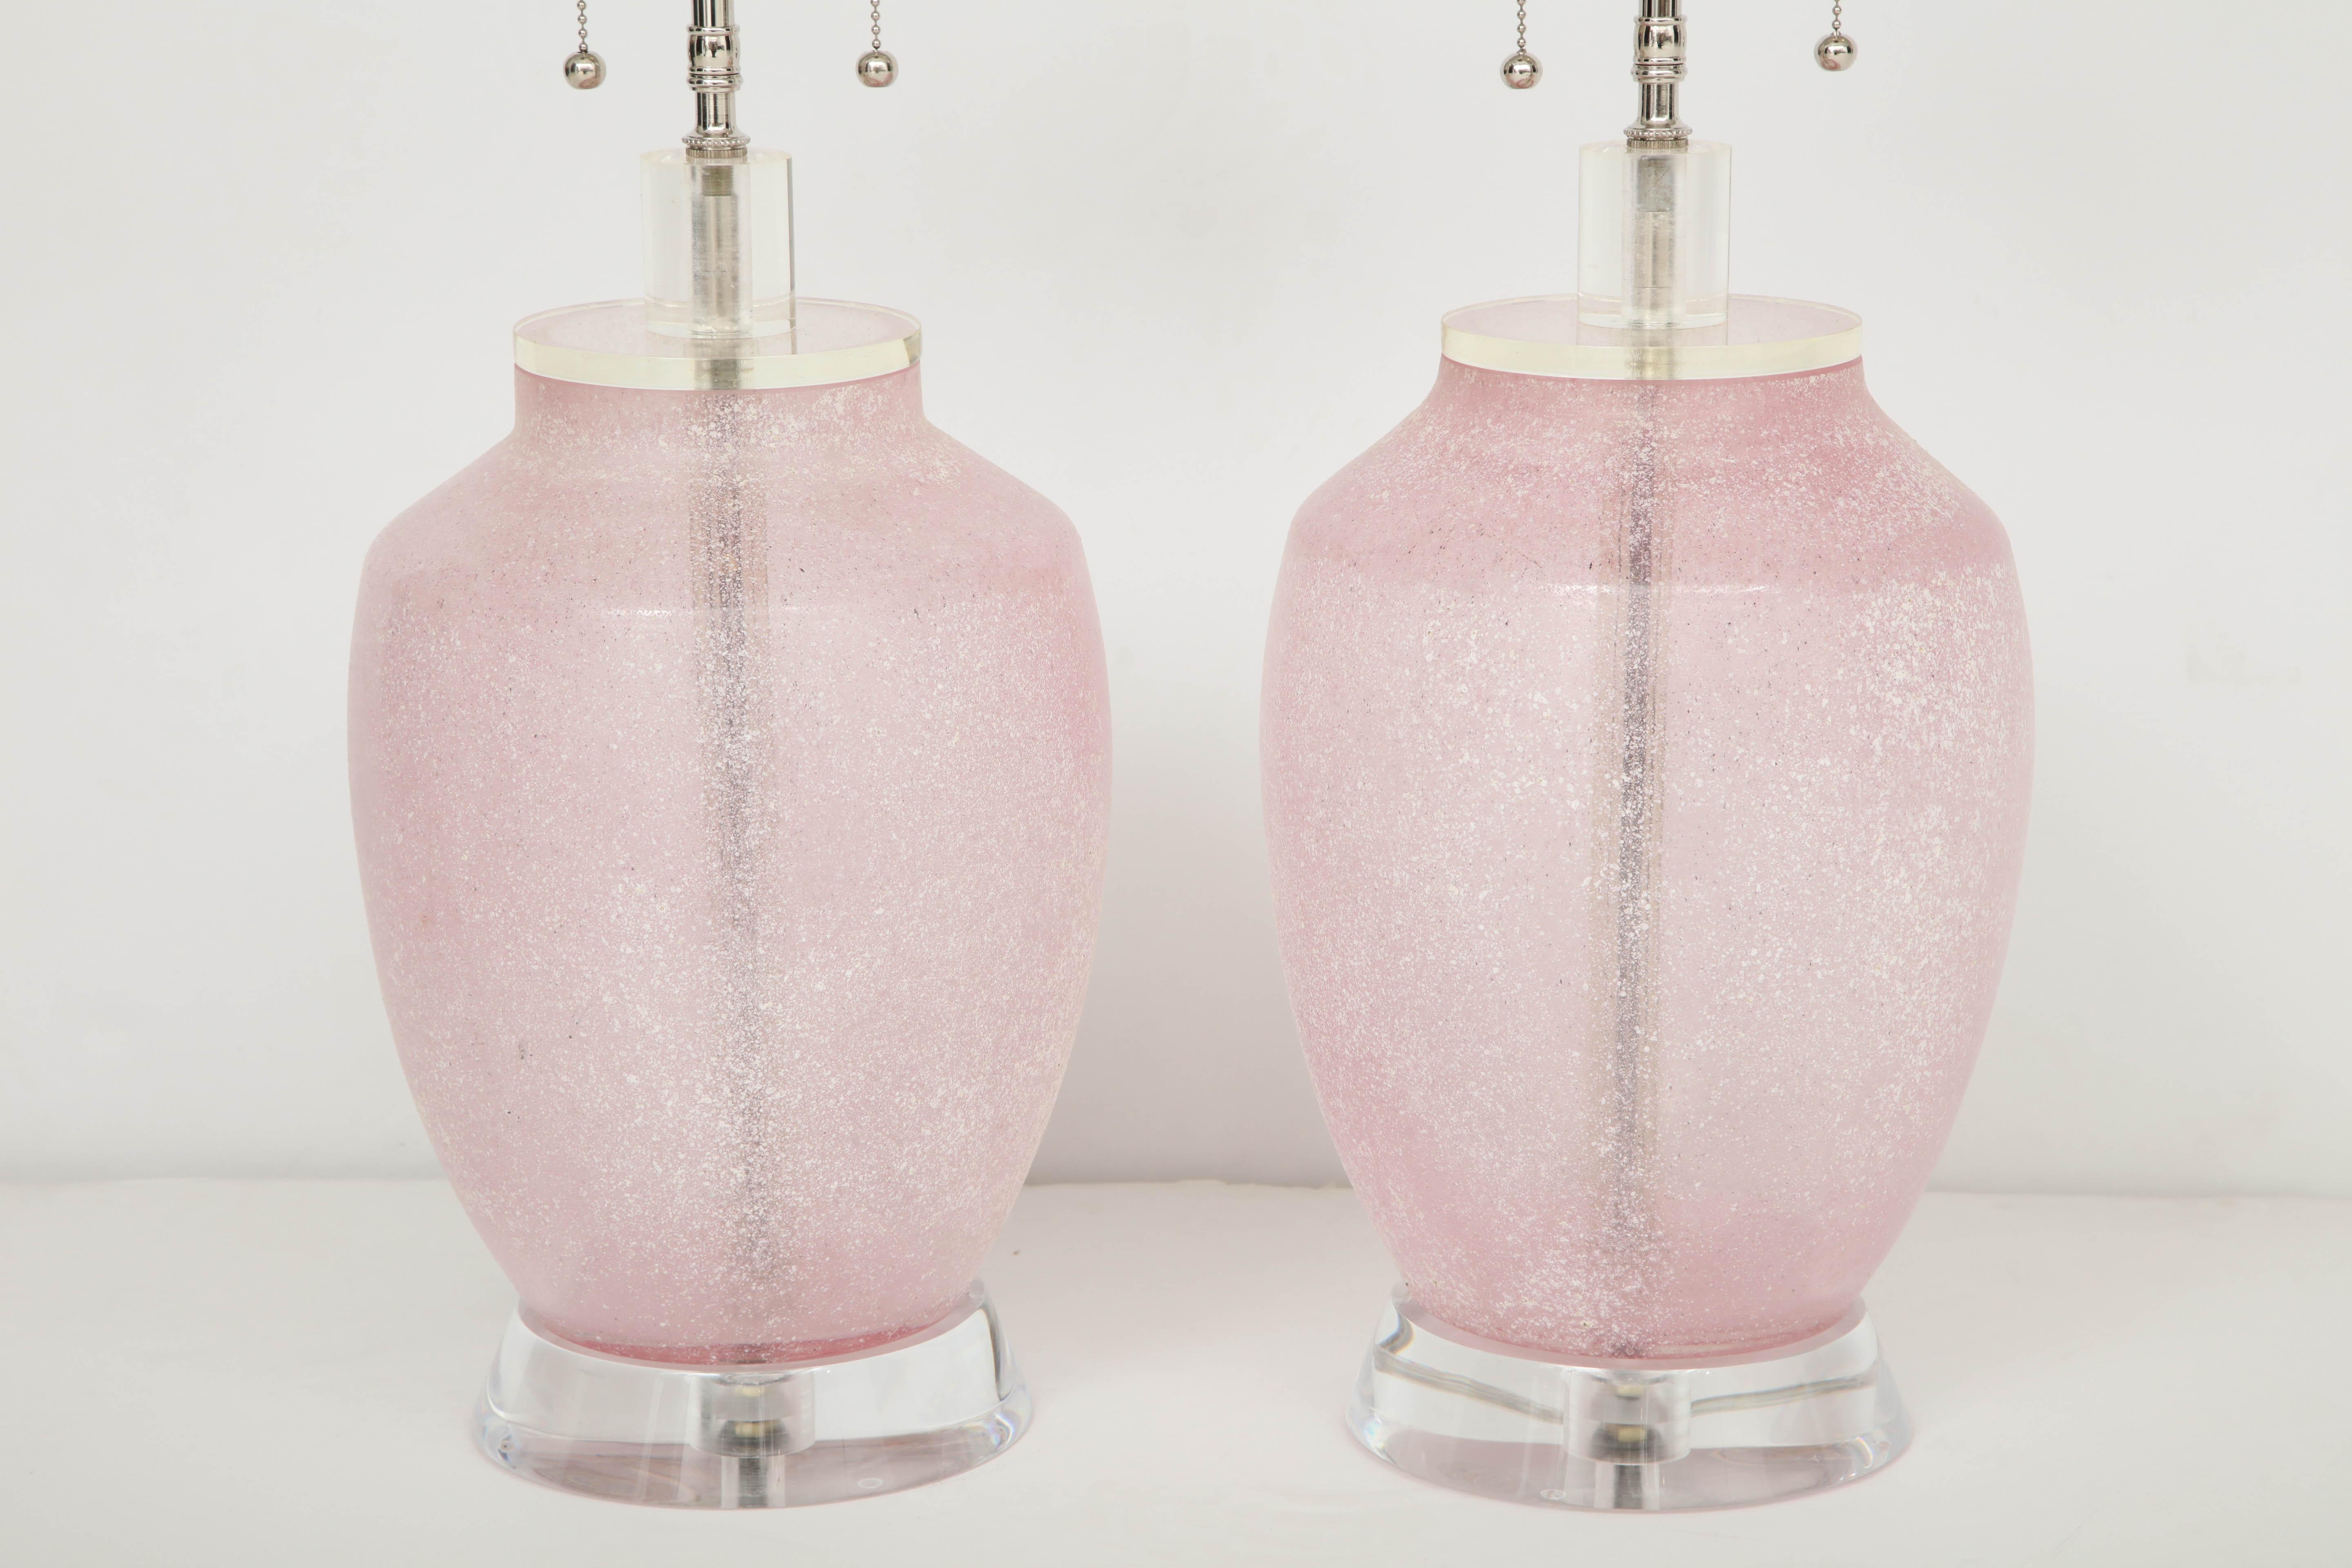 Pair of large 1960s lamps by Cenedese.
The pink lamp bodies have a frosted textured finish and are mounted on thick Lucite bases.
The lamps have been newly rewired for the US with polished nickel double clusters that take standard US light bulbs.